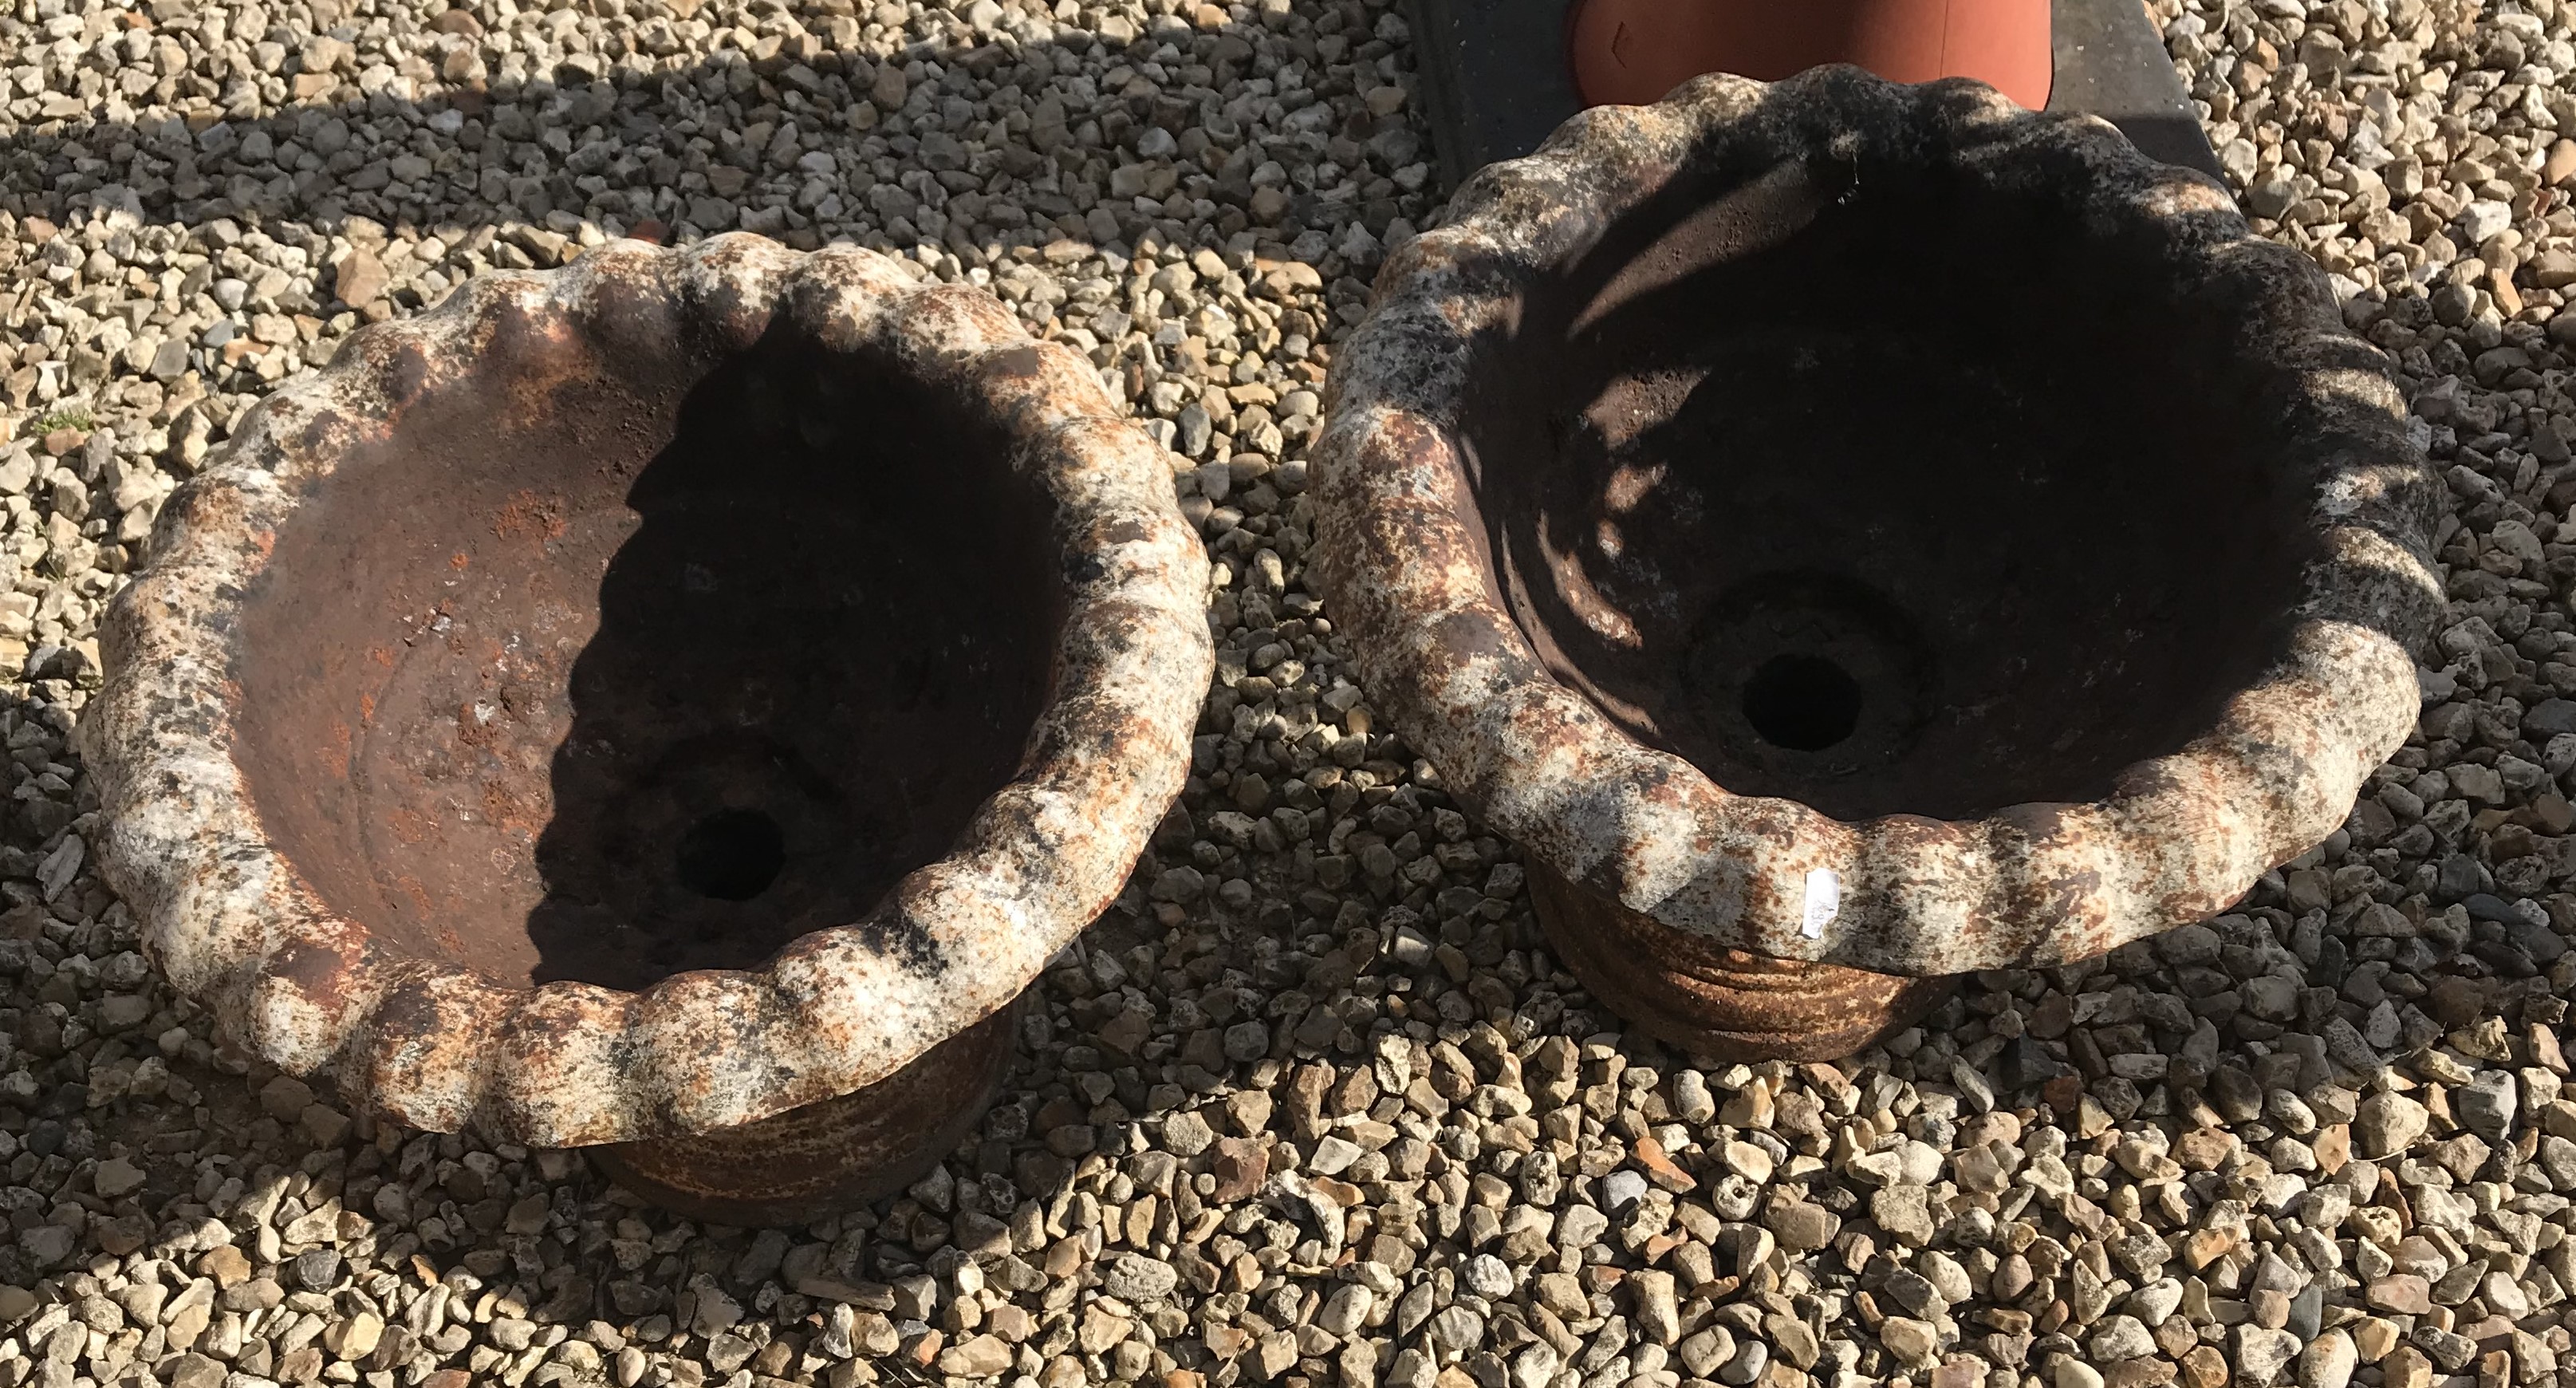 Two cast iron urns,